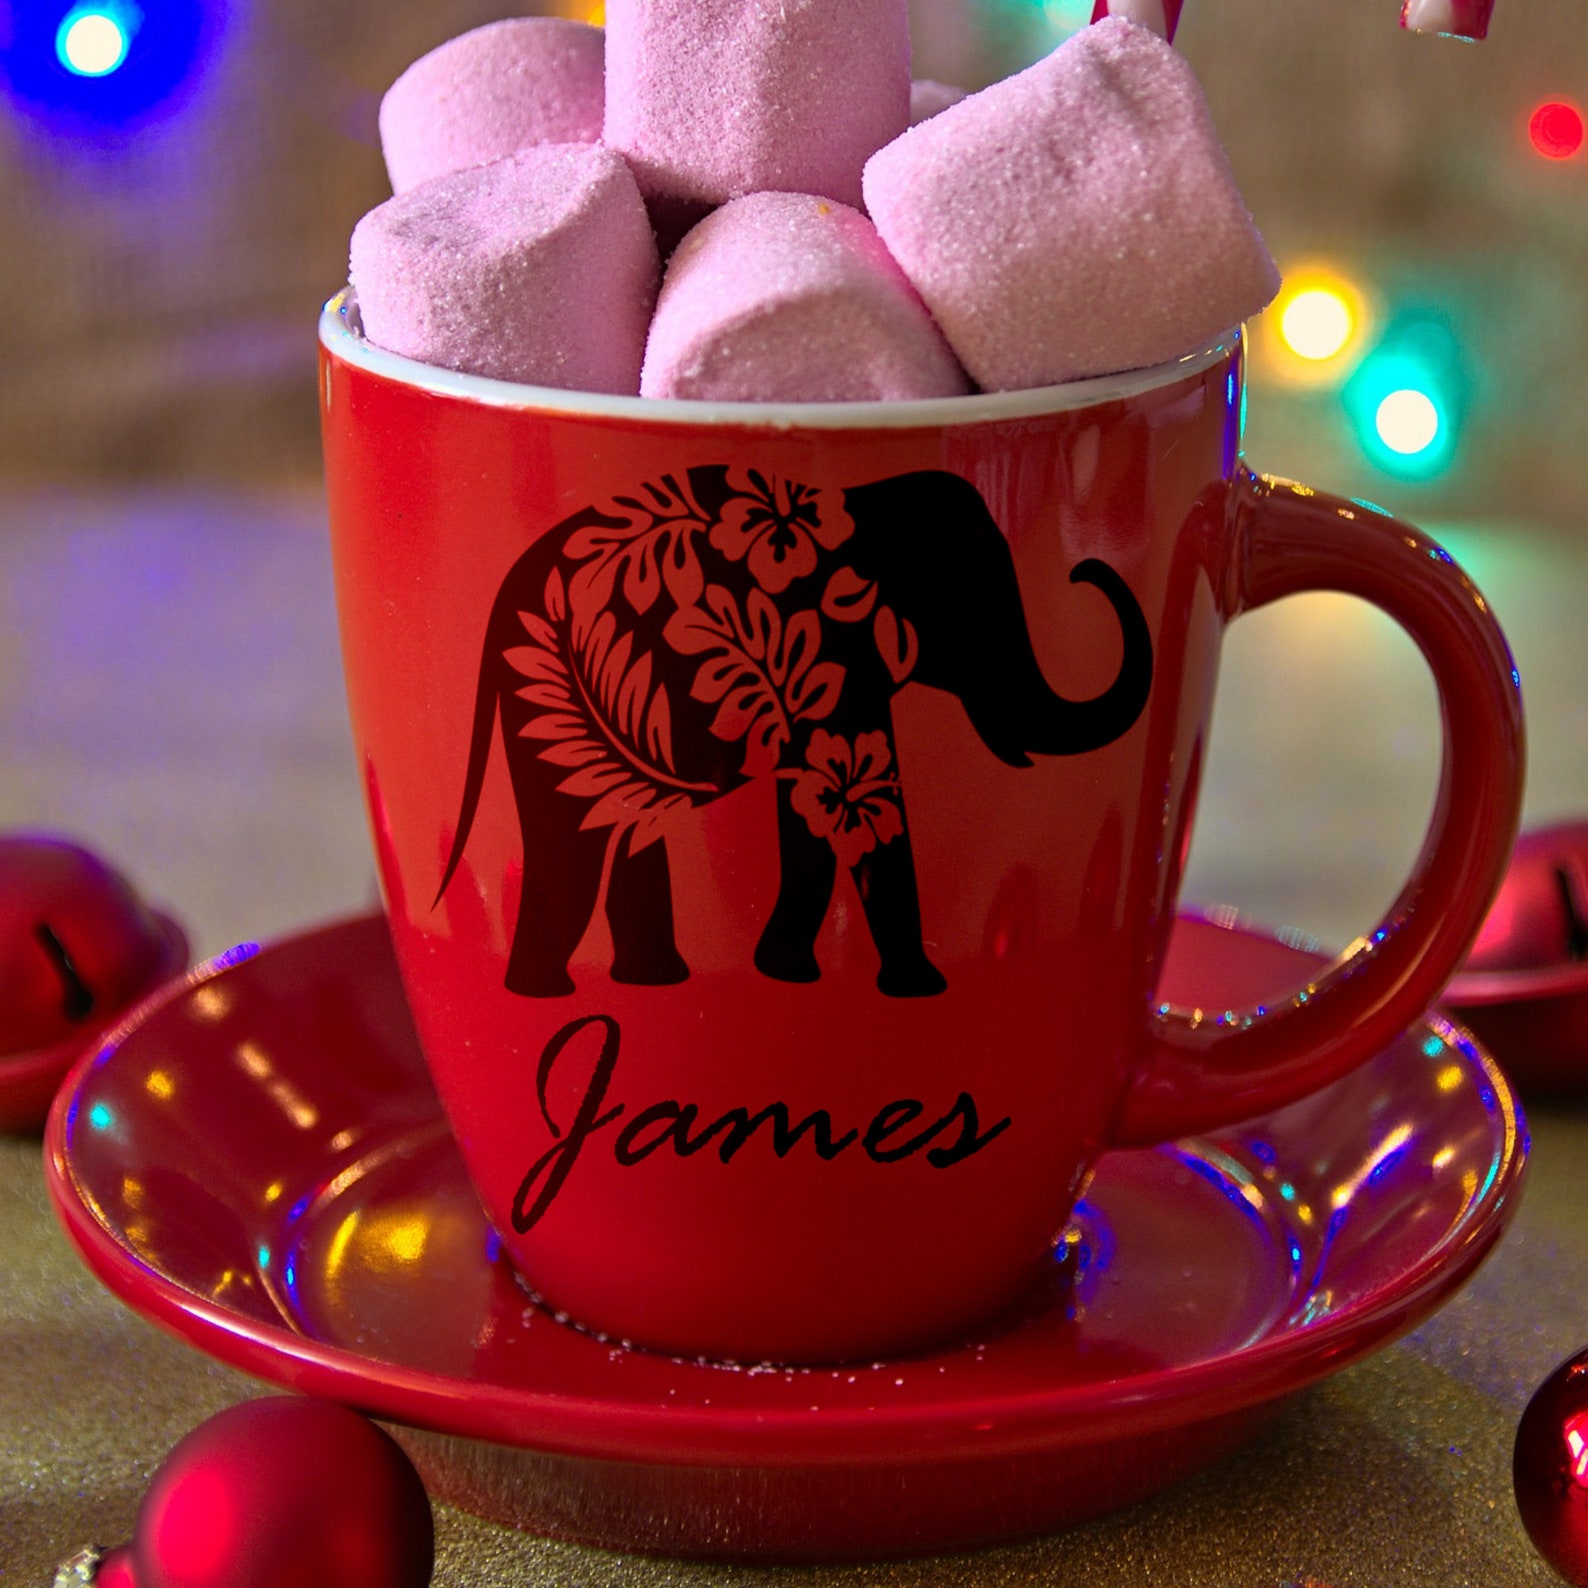 Red cup filled with marshmallows on top of a saucer.